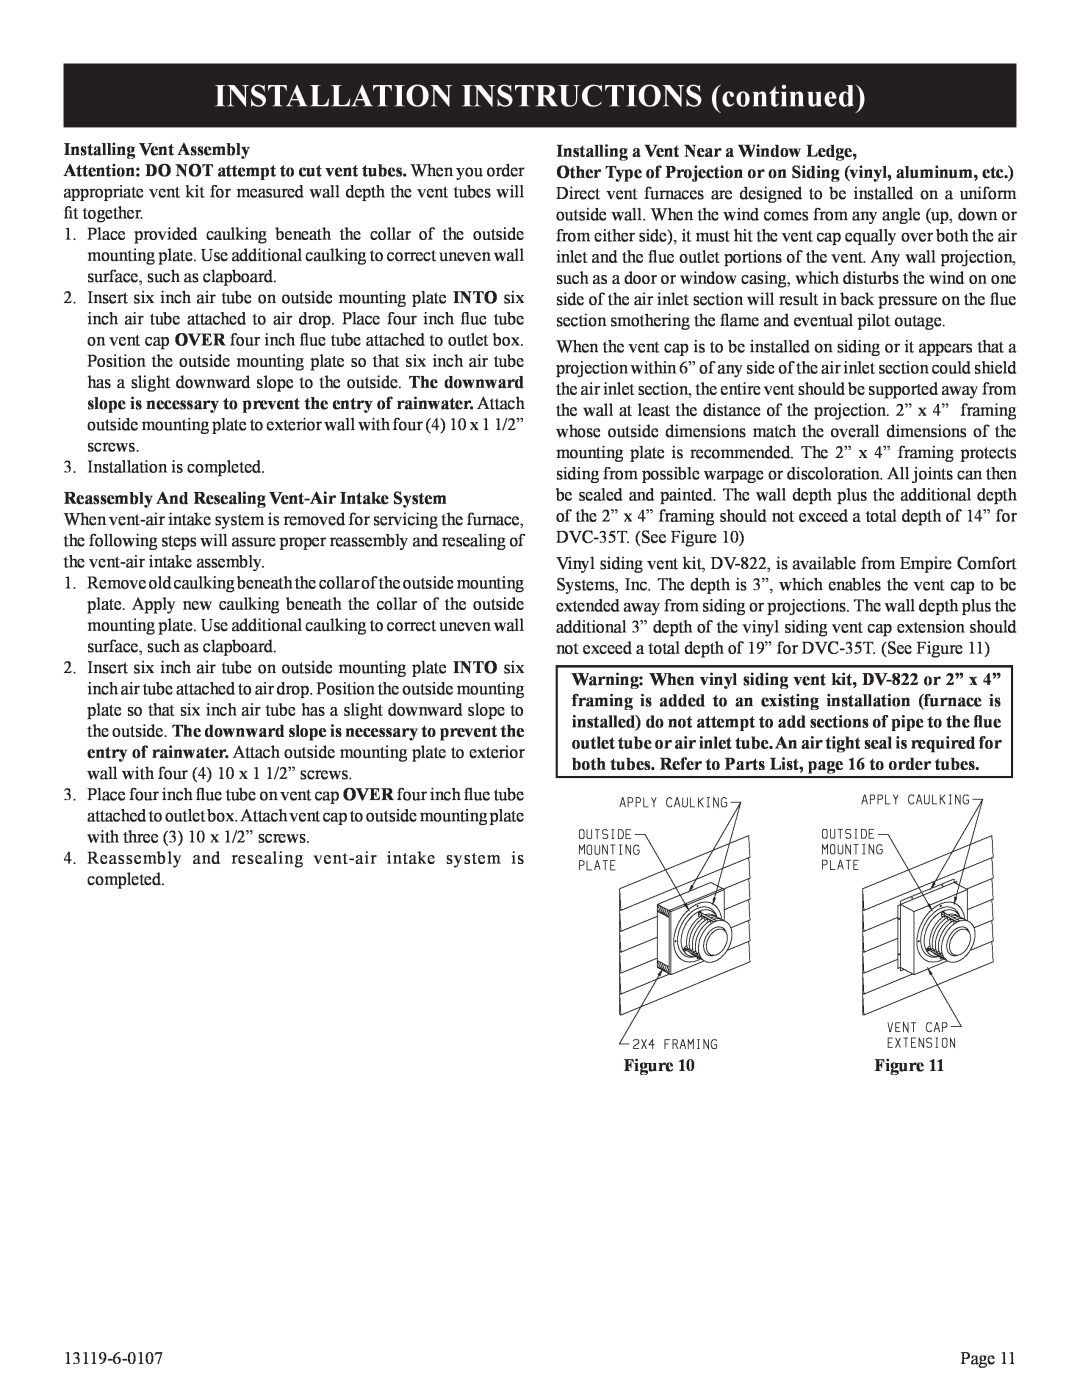 Empire Products DVC-35T-1, DVC-35IPT-1 INSTALLATION INSTRUCTIONS continued, Installing Vent Assembly 